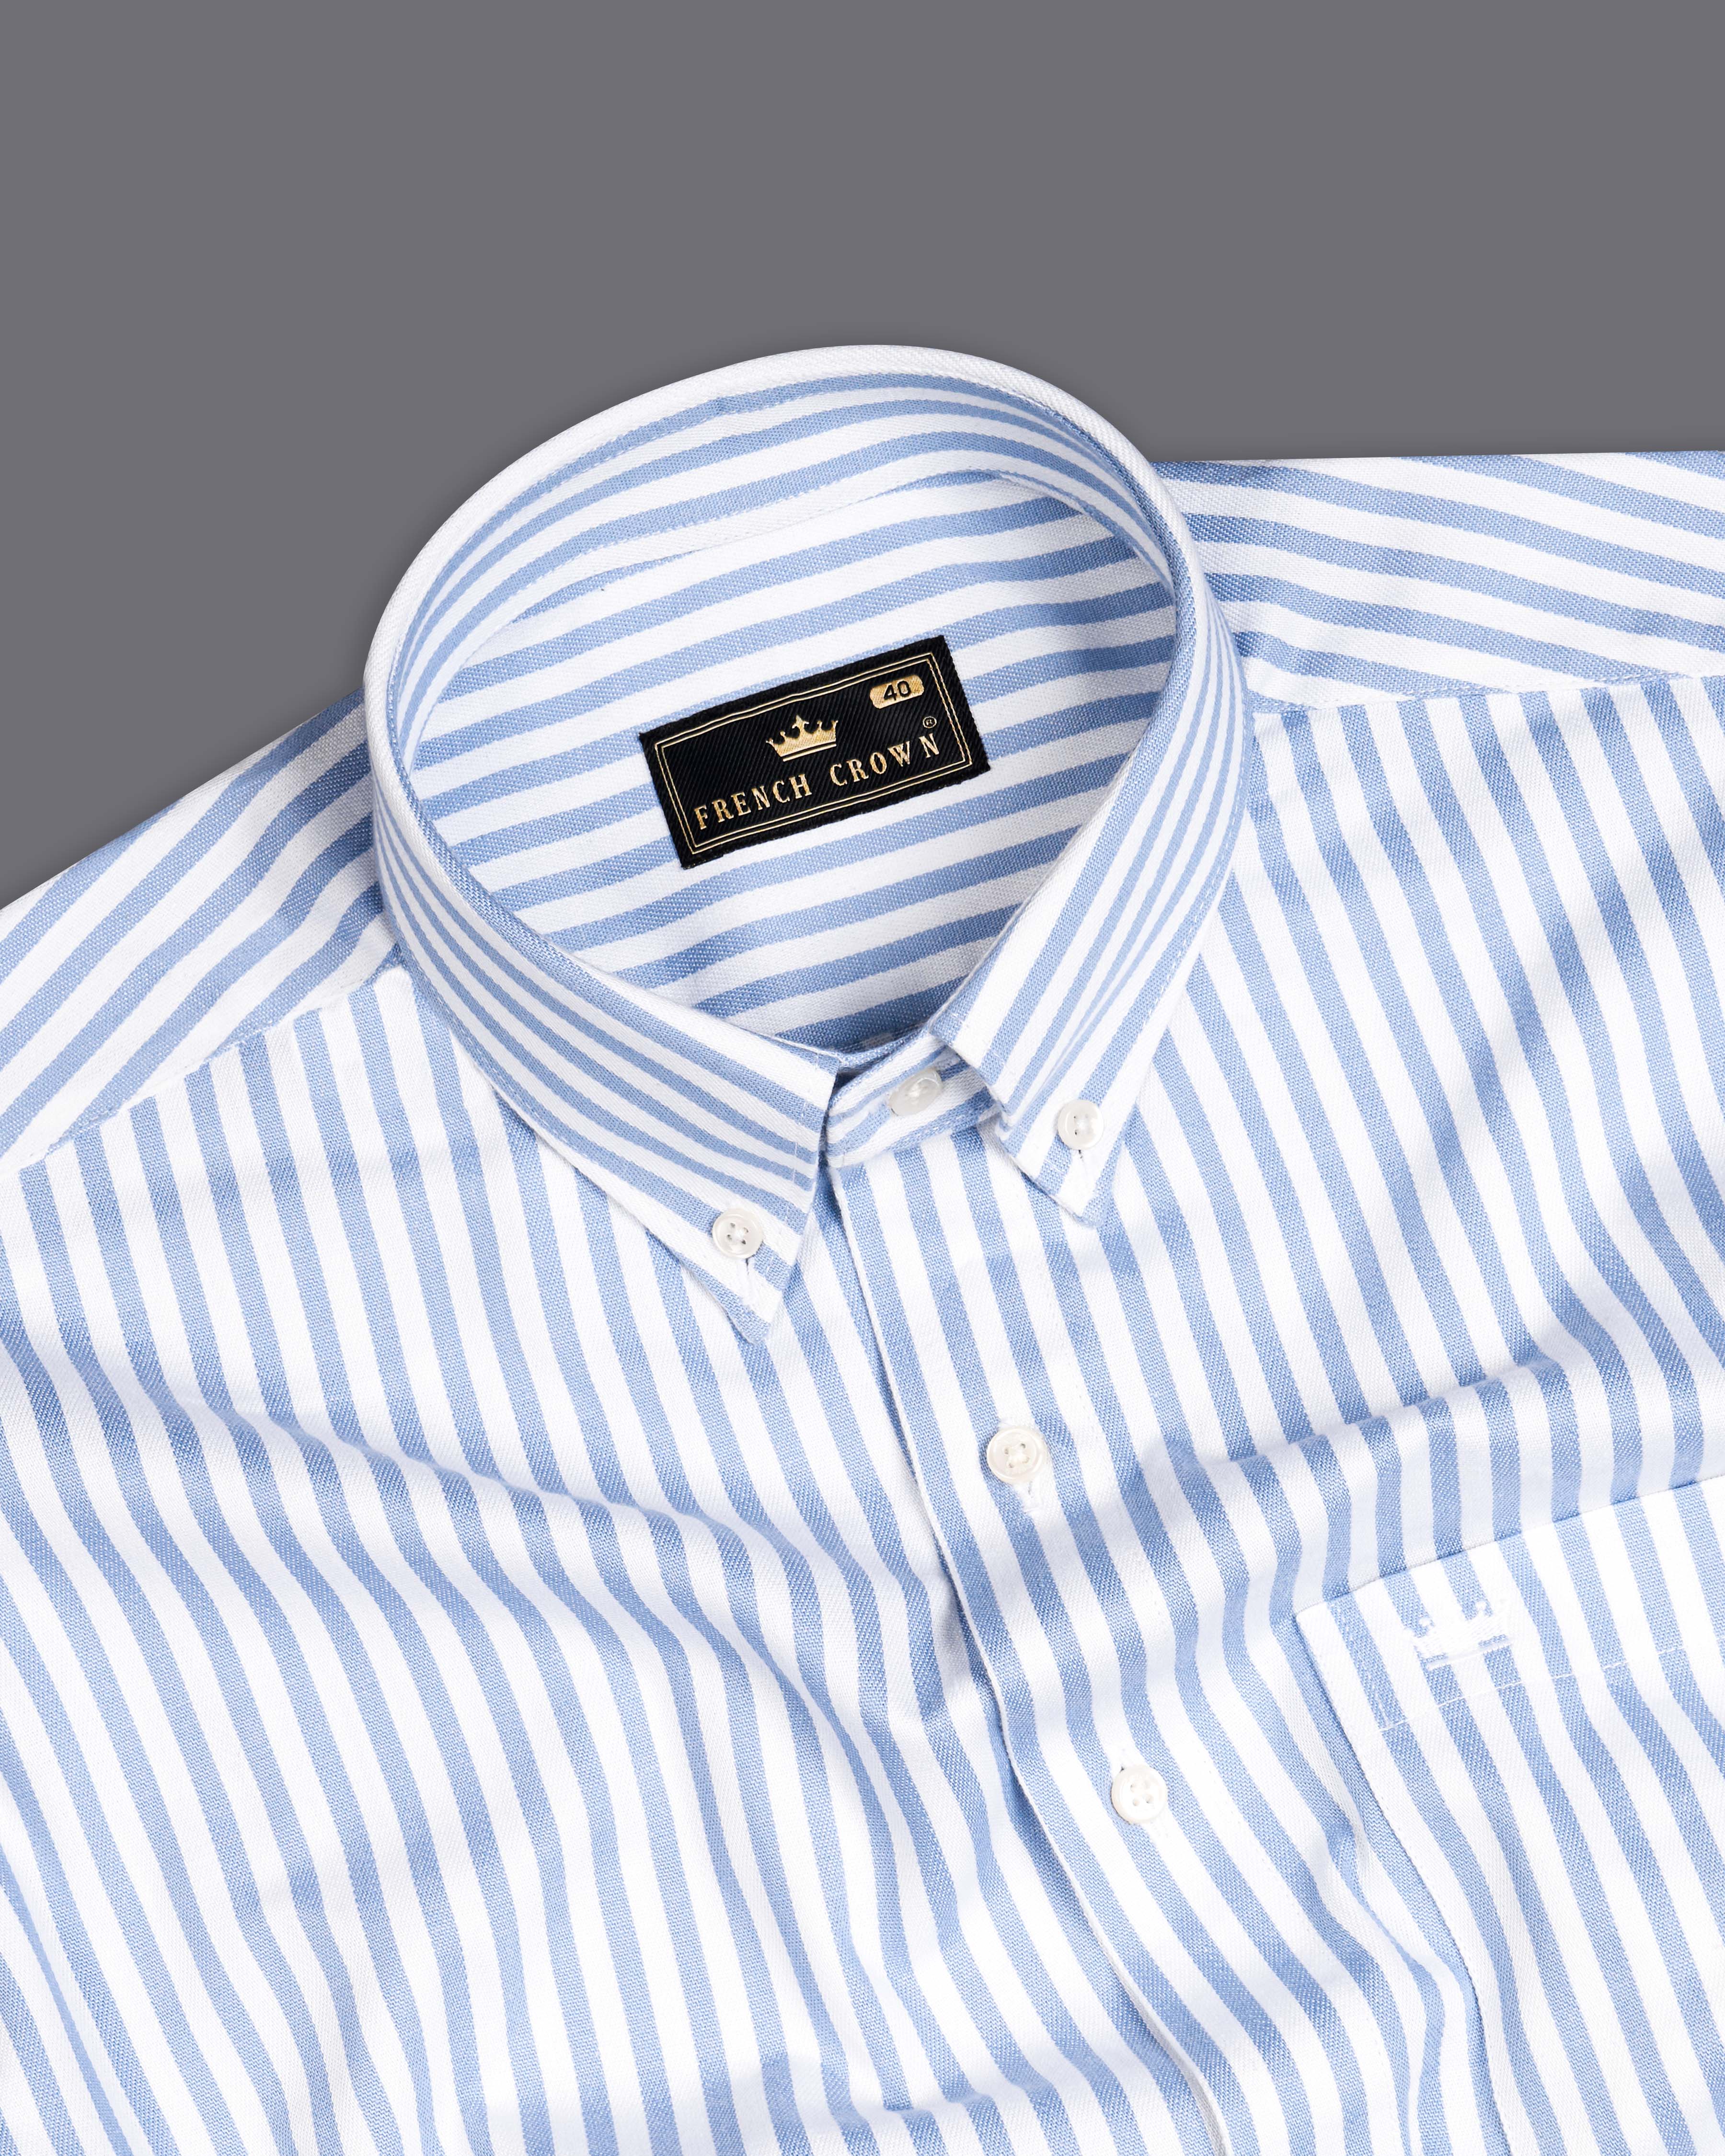 Pale Cerulean Blue with White Striped Royal Oxford Shirt 9944-BD-38, 9944-BD-H-38, 9944-BD-39, 9944-BD-H-39, 9944-BD-40, 9944-BD-H-40, 9944-BD-42, 9944-BD-H-42, 9944-BD-44, 9944-BD-H-44, 9944-BD-46, 9944-BD-H-46, 9944-BD-48, 9944-BD-H-48, 9944-BD-50, 9944-BD-H-50, 9944-BD-52, 9944-BD-H-52